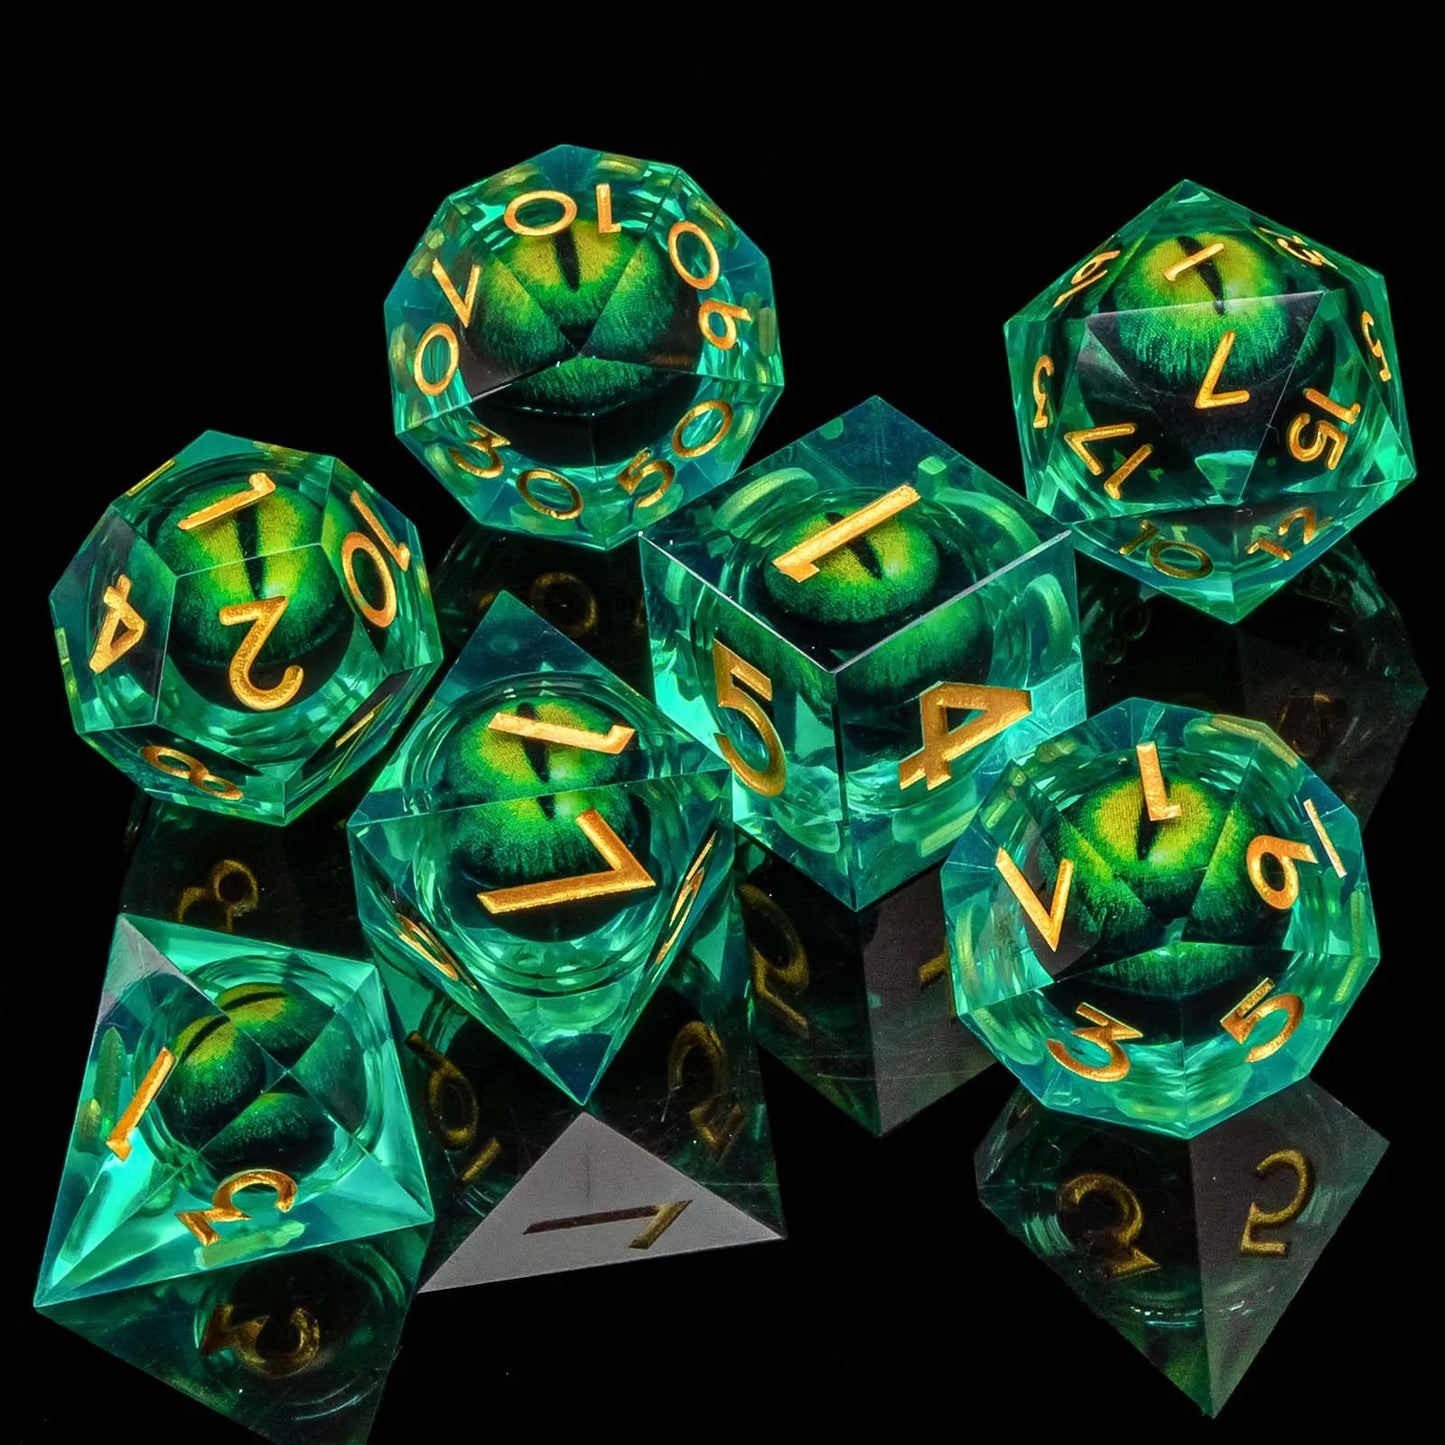 DND Eye Liquid Flow Core Resin D&D Dice Set For D and D Dungeon and Dragon Pathfinder Table Role Playing Game Polyhedral Dice AZ04